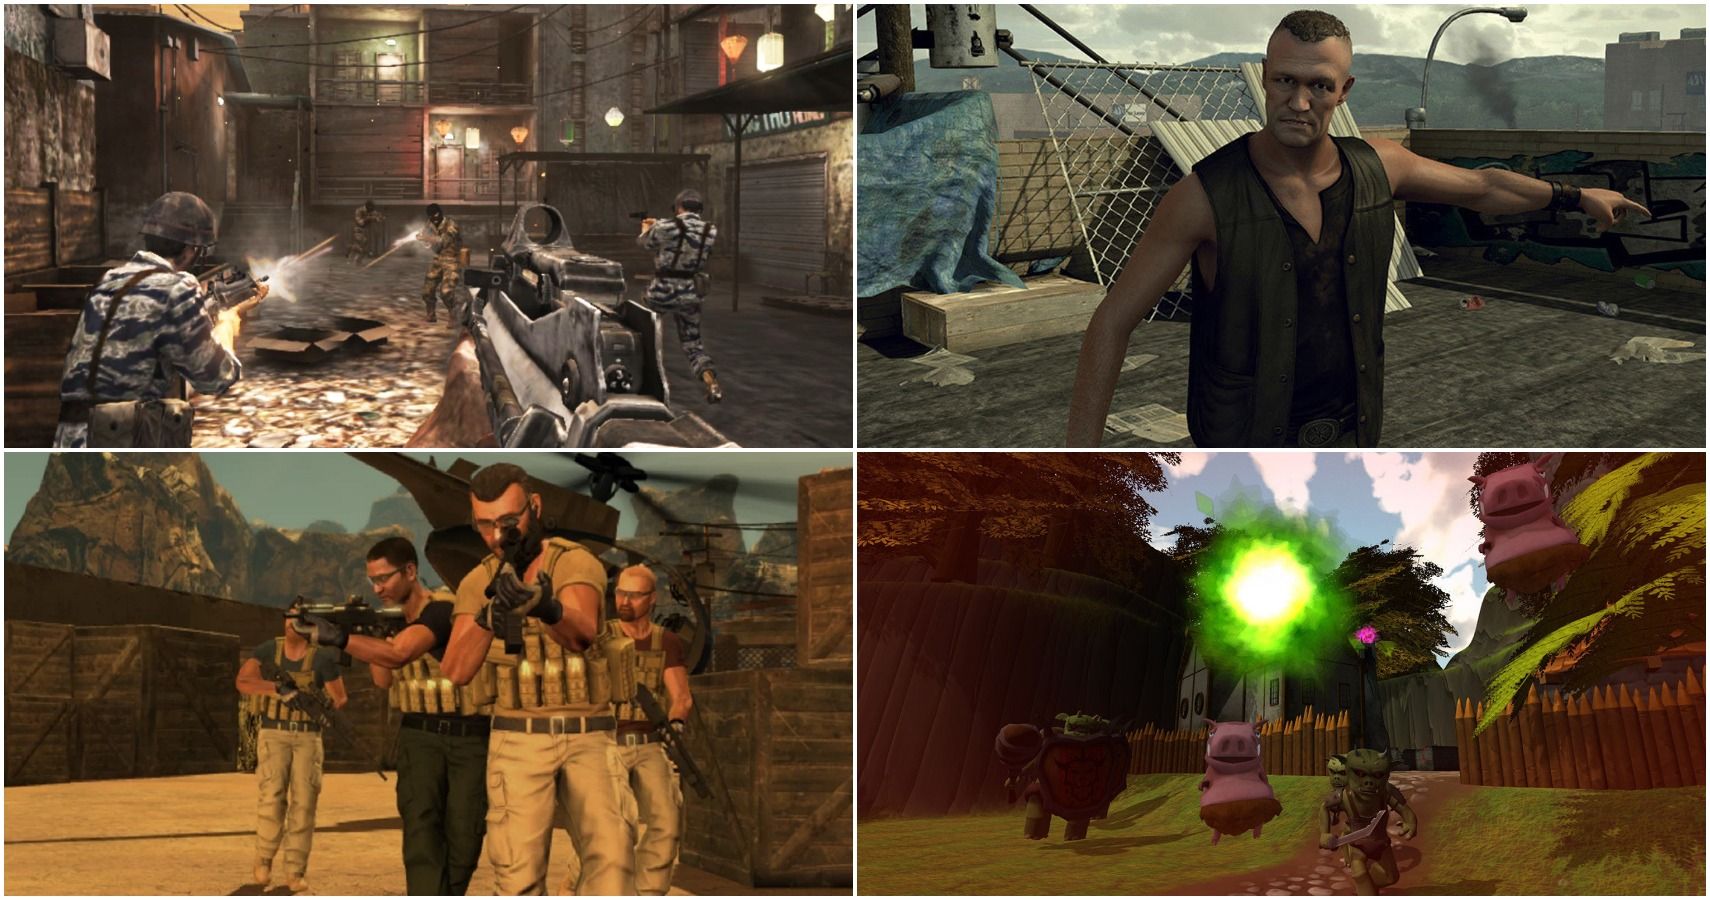 The 10 Worst First-Person Shooter Video Games Of The Decade (According To Metacritic)